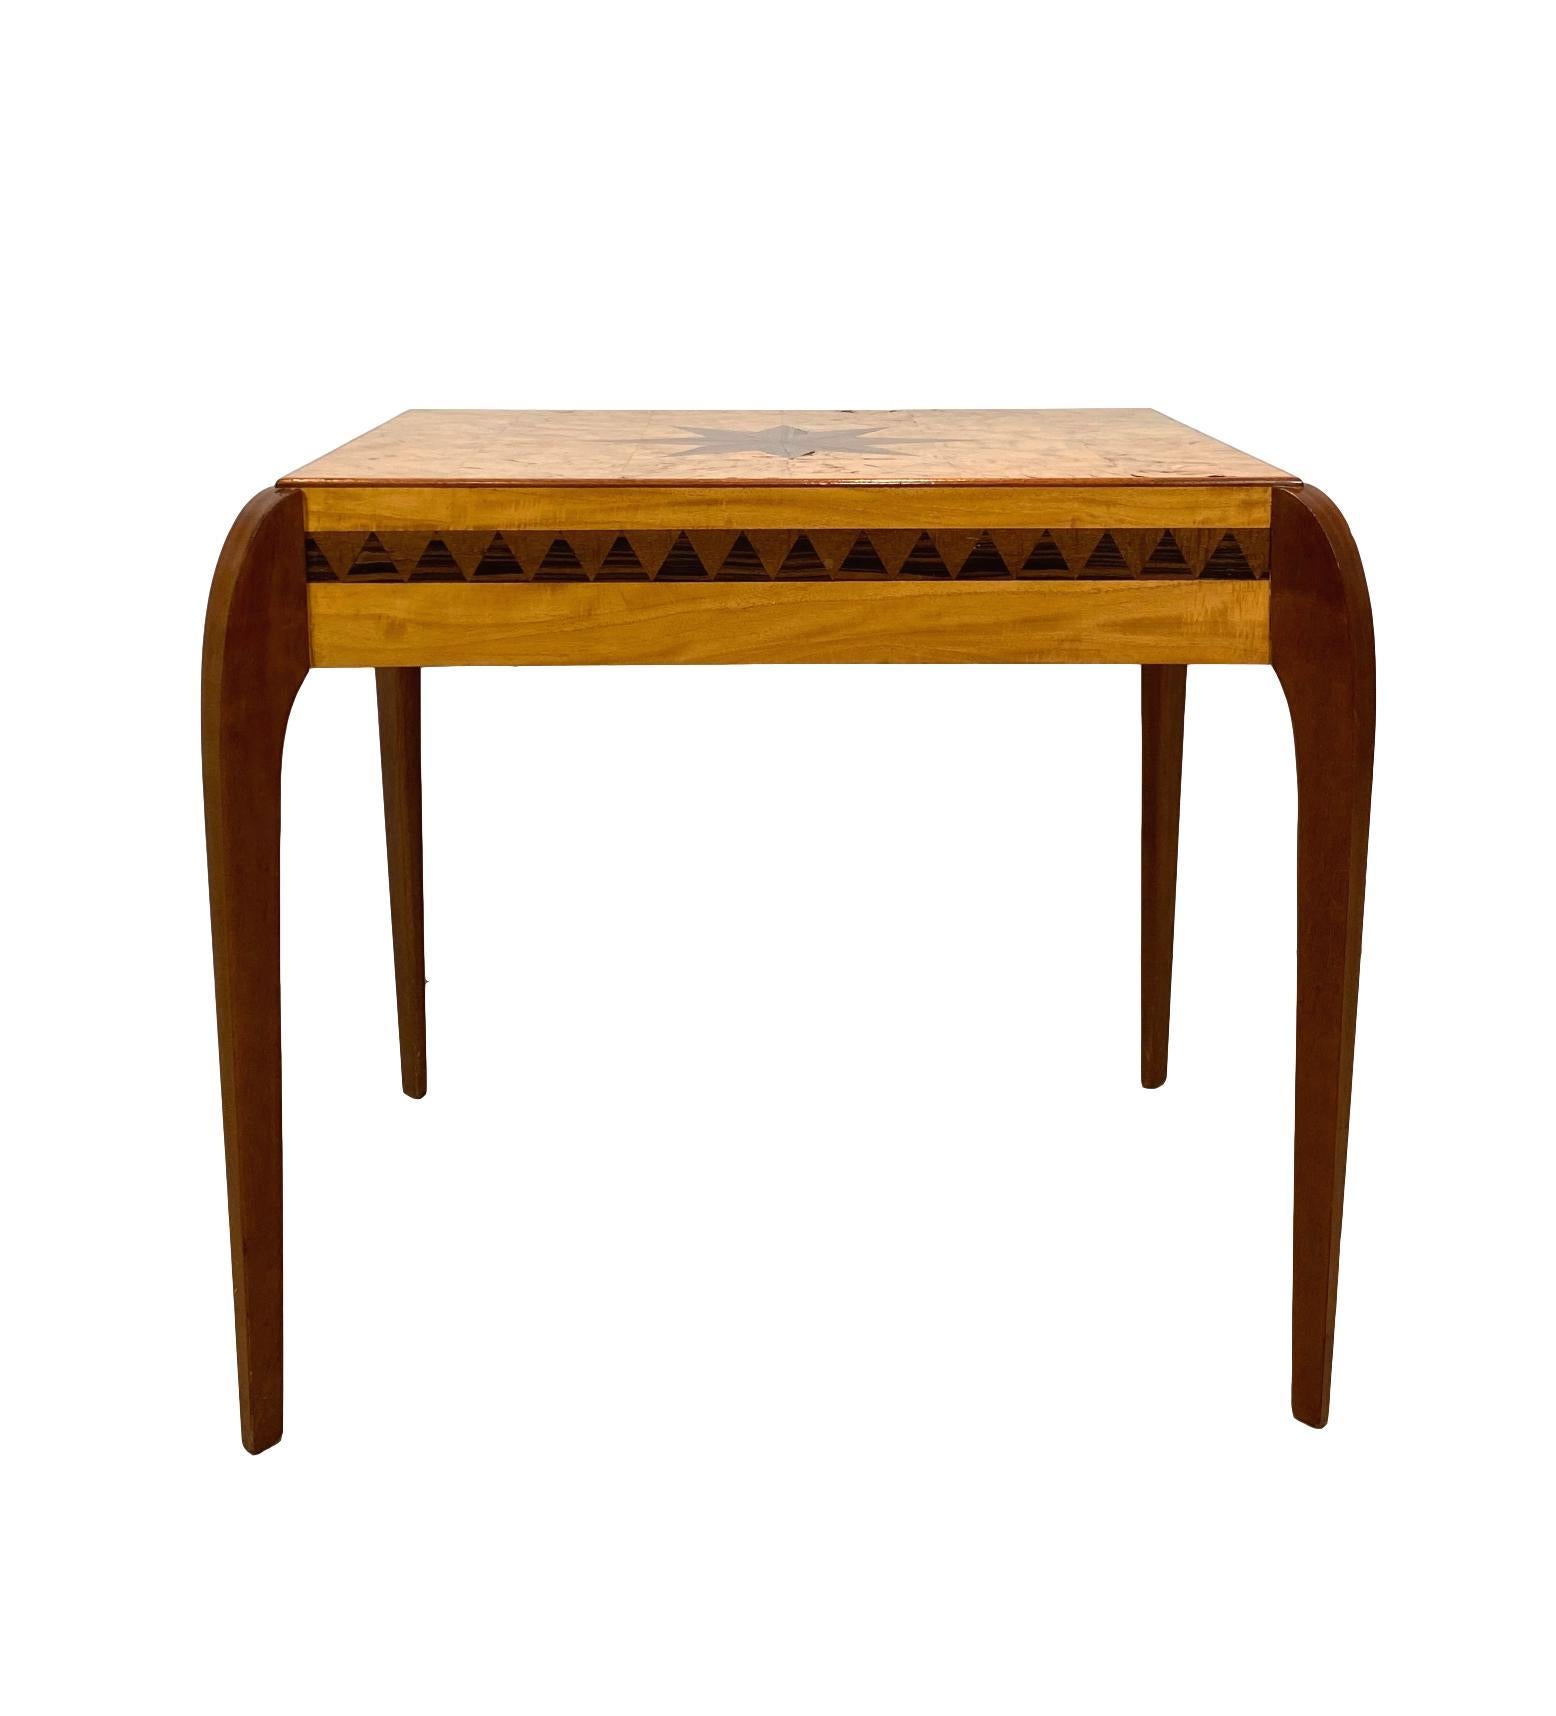 Mid-Century Modern/Art Deco-style inlaid center table in exotic woods, the thick cut parquetry burl maple top with a large inlaid rosewood trompe l'oeil compass star, all four sides with an inlaid geometrical band of alternating rosewood and